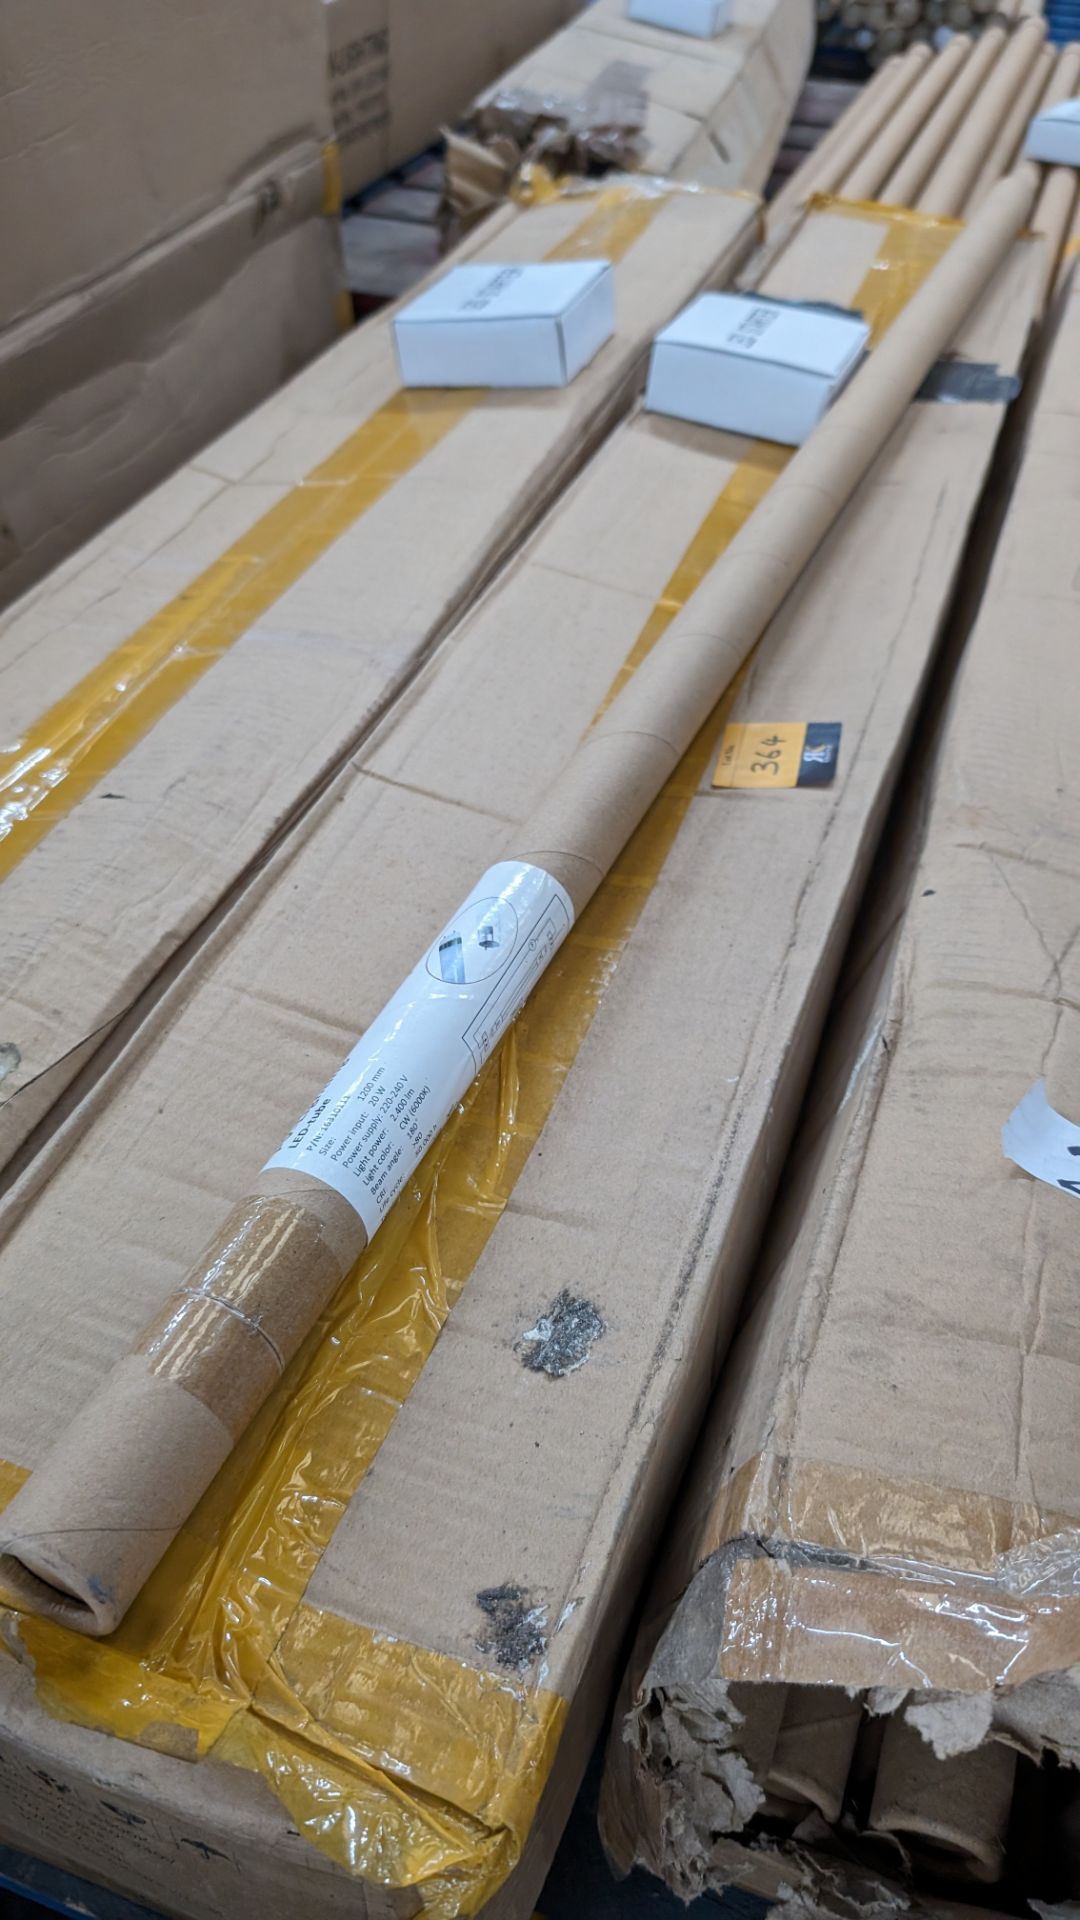 5 boxes of 1200mm LED 20w tubes - 4 boxes of cold white and 1 box of natural white. Approximately 1 - Bild 6 aus 6